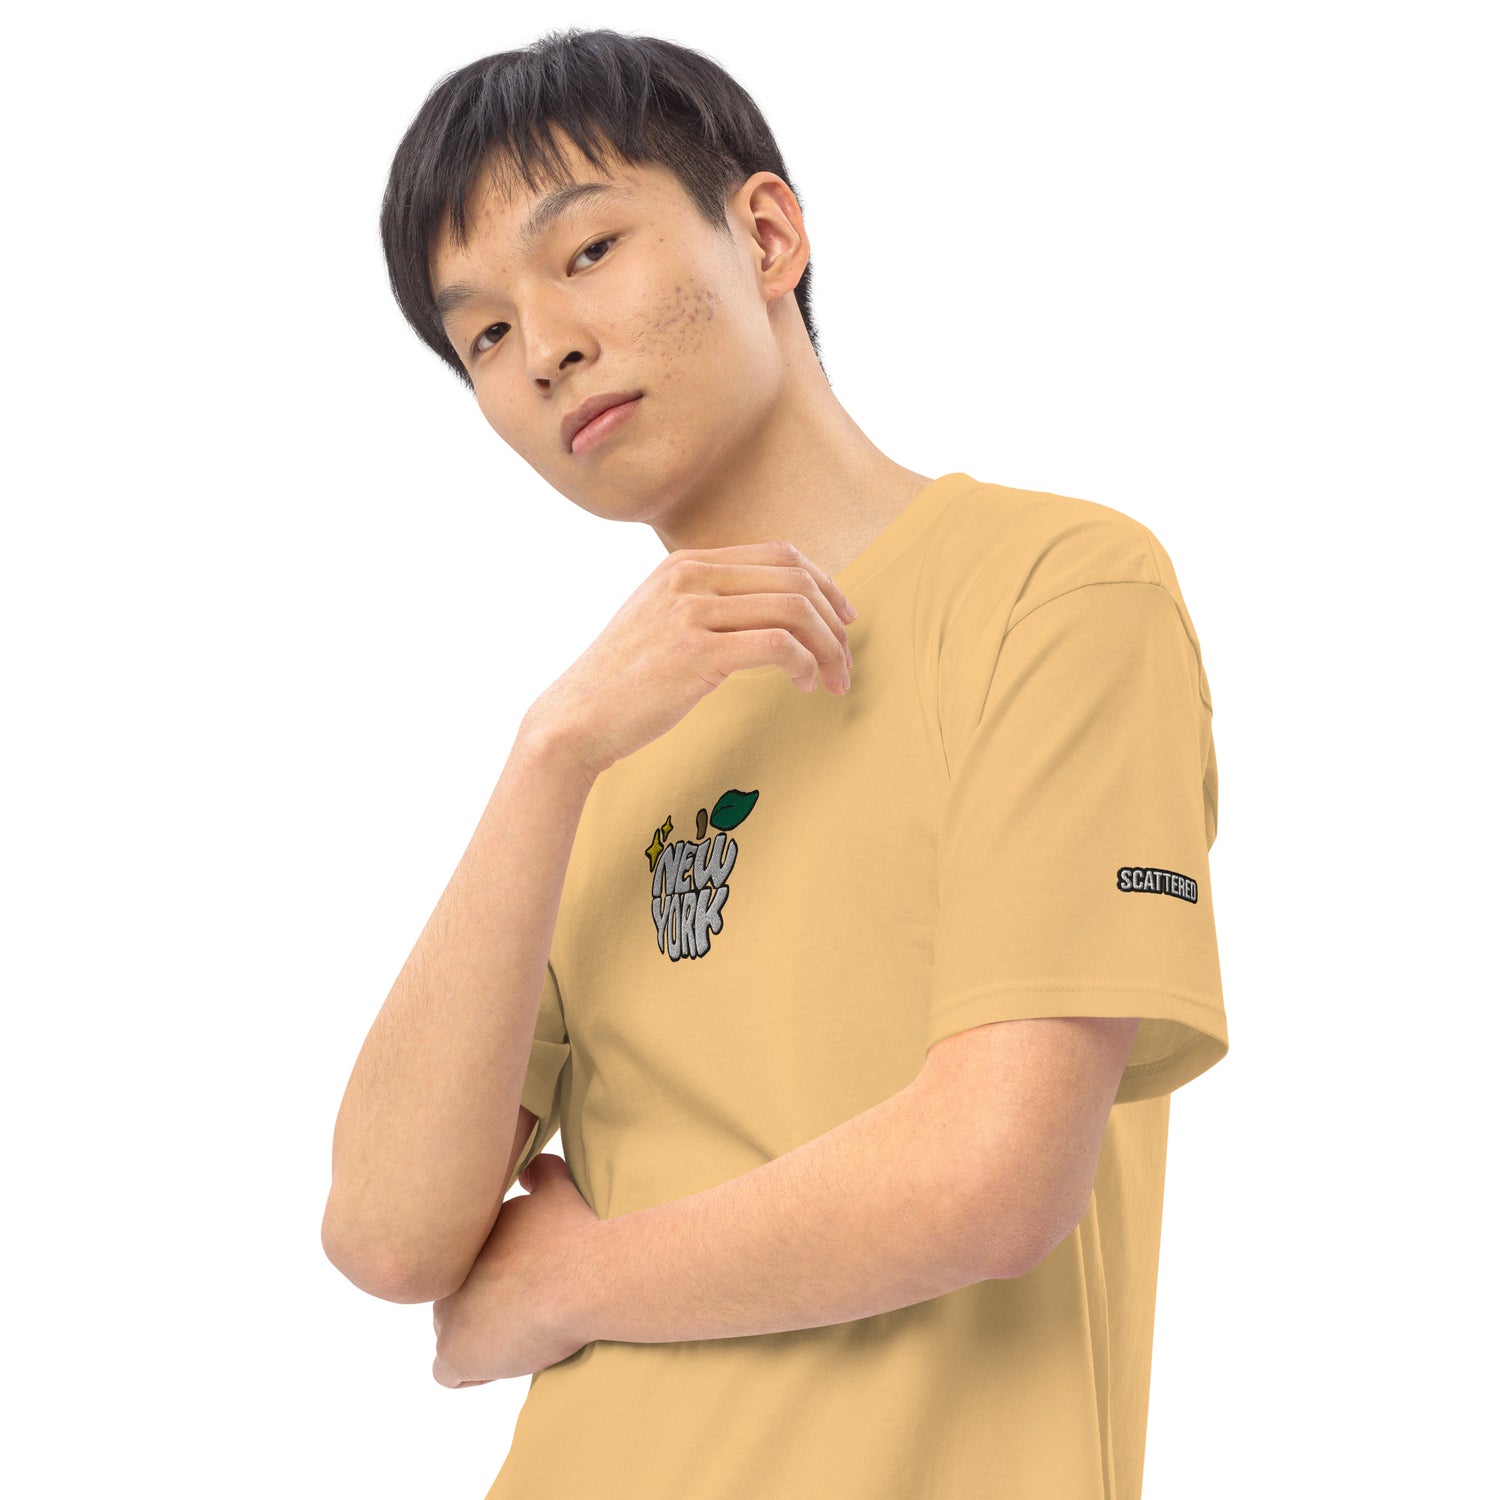 New York Apple Logo Embroidered Yellow T-Shirt Scattered Streetwear